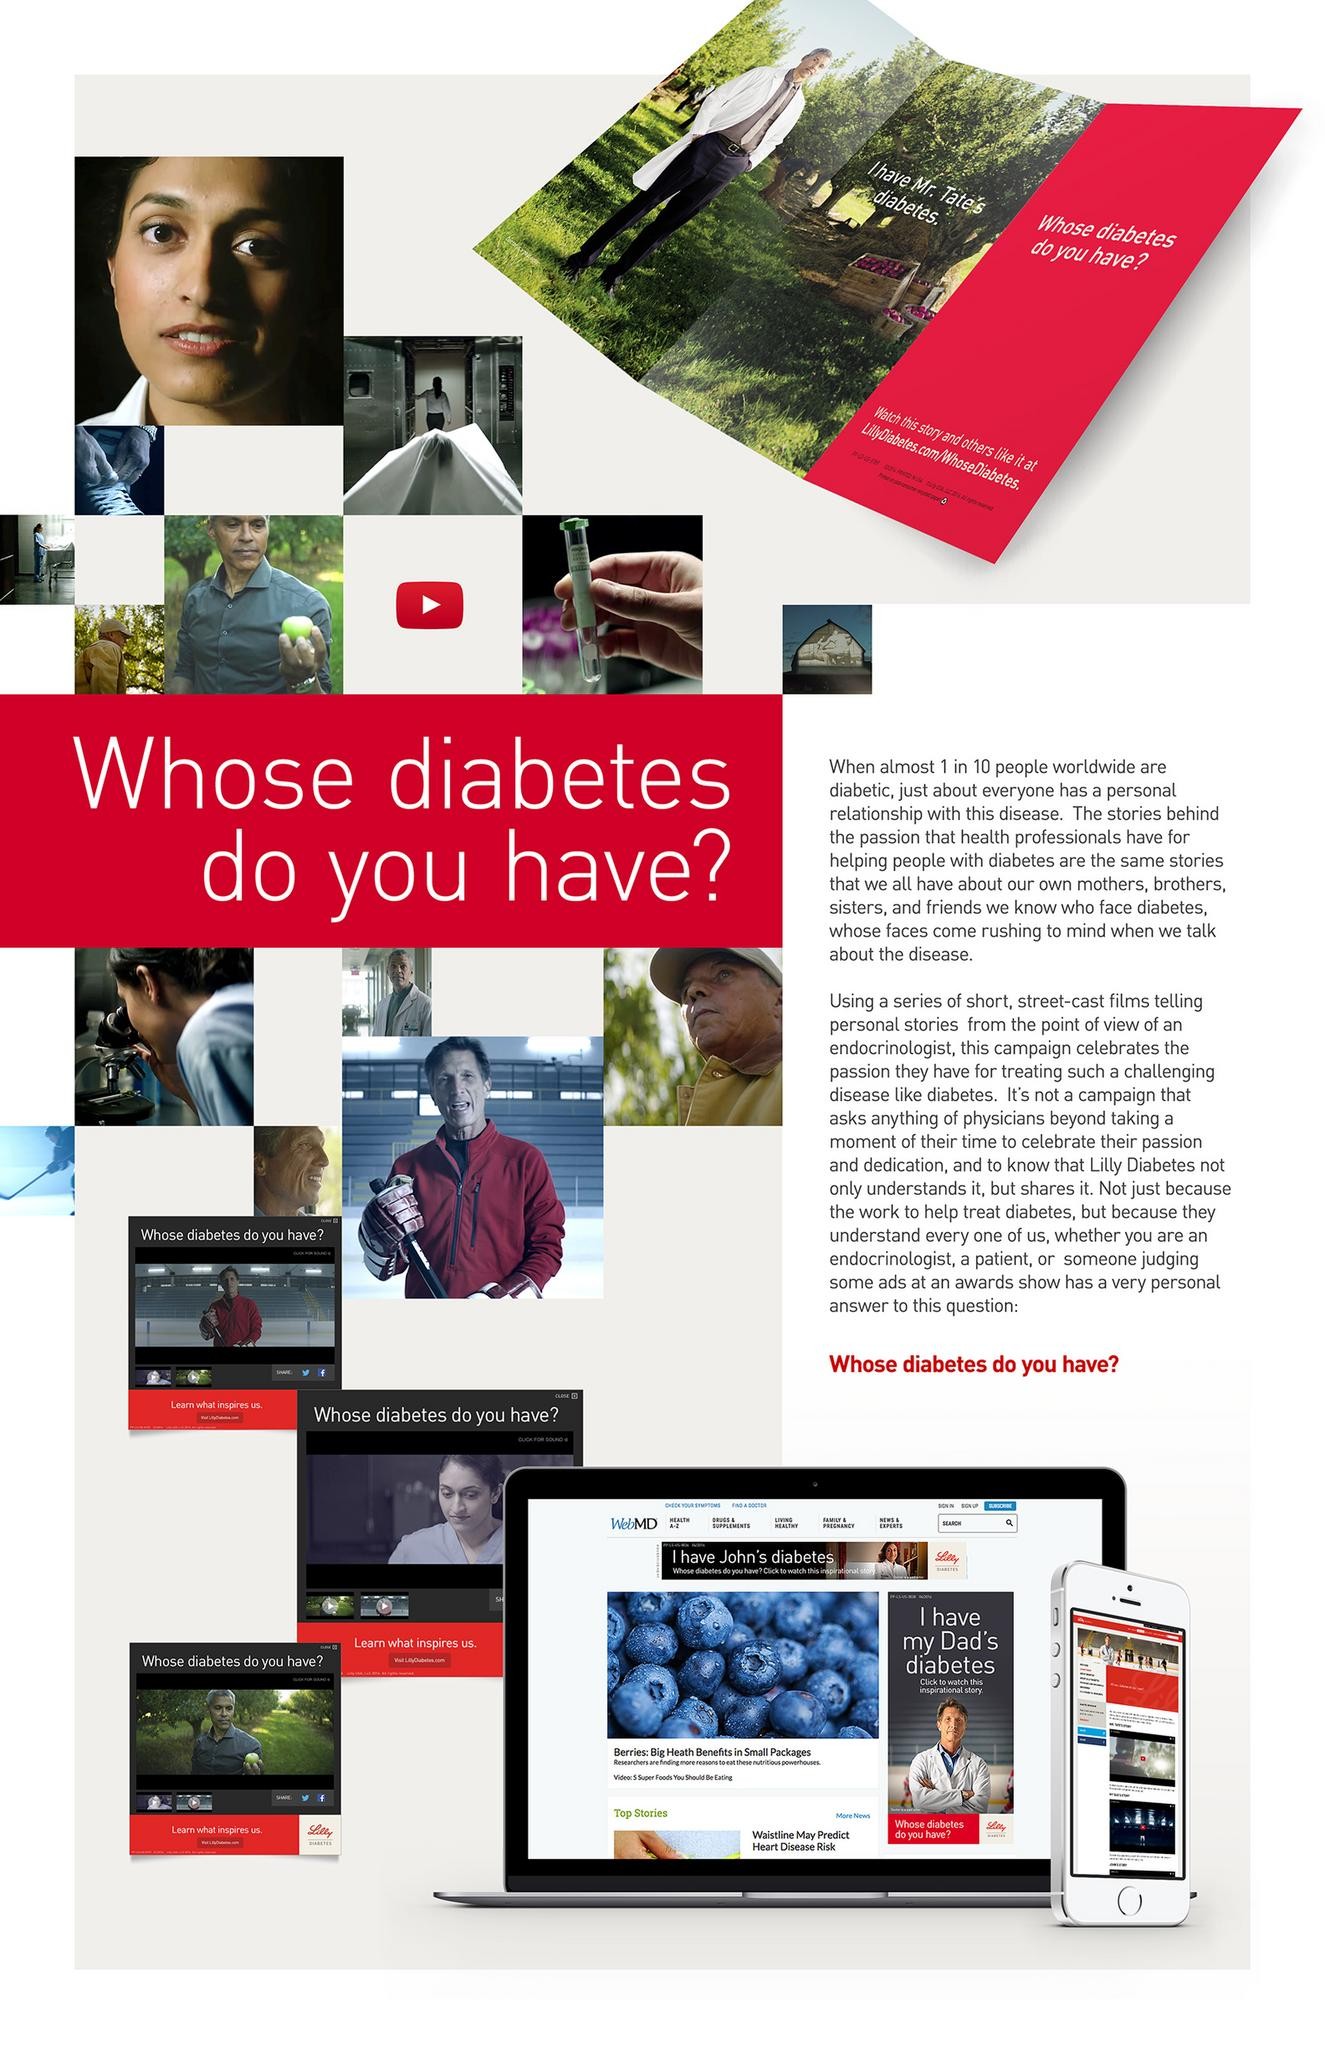 Whose Diabetes Do You Have? "Rich Media Banner